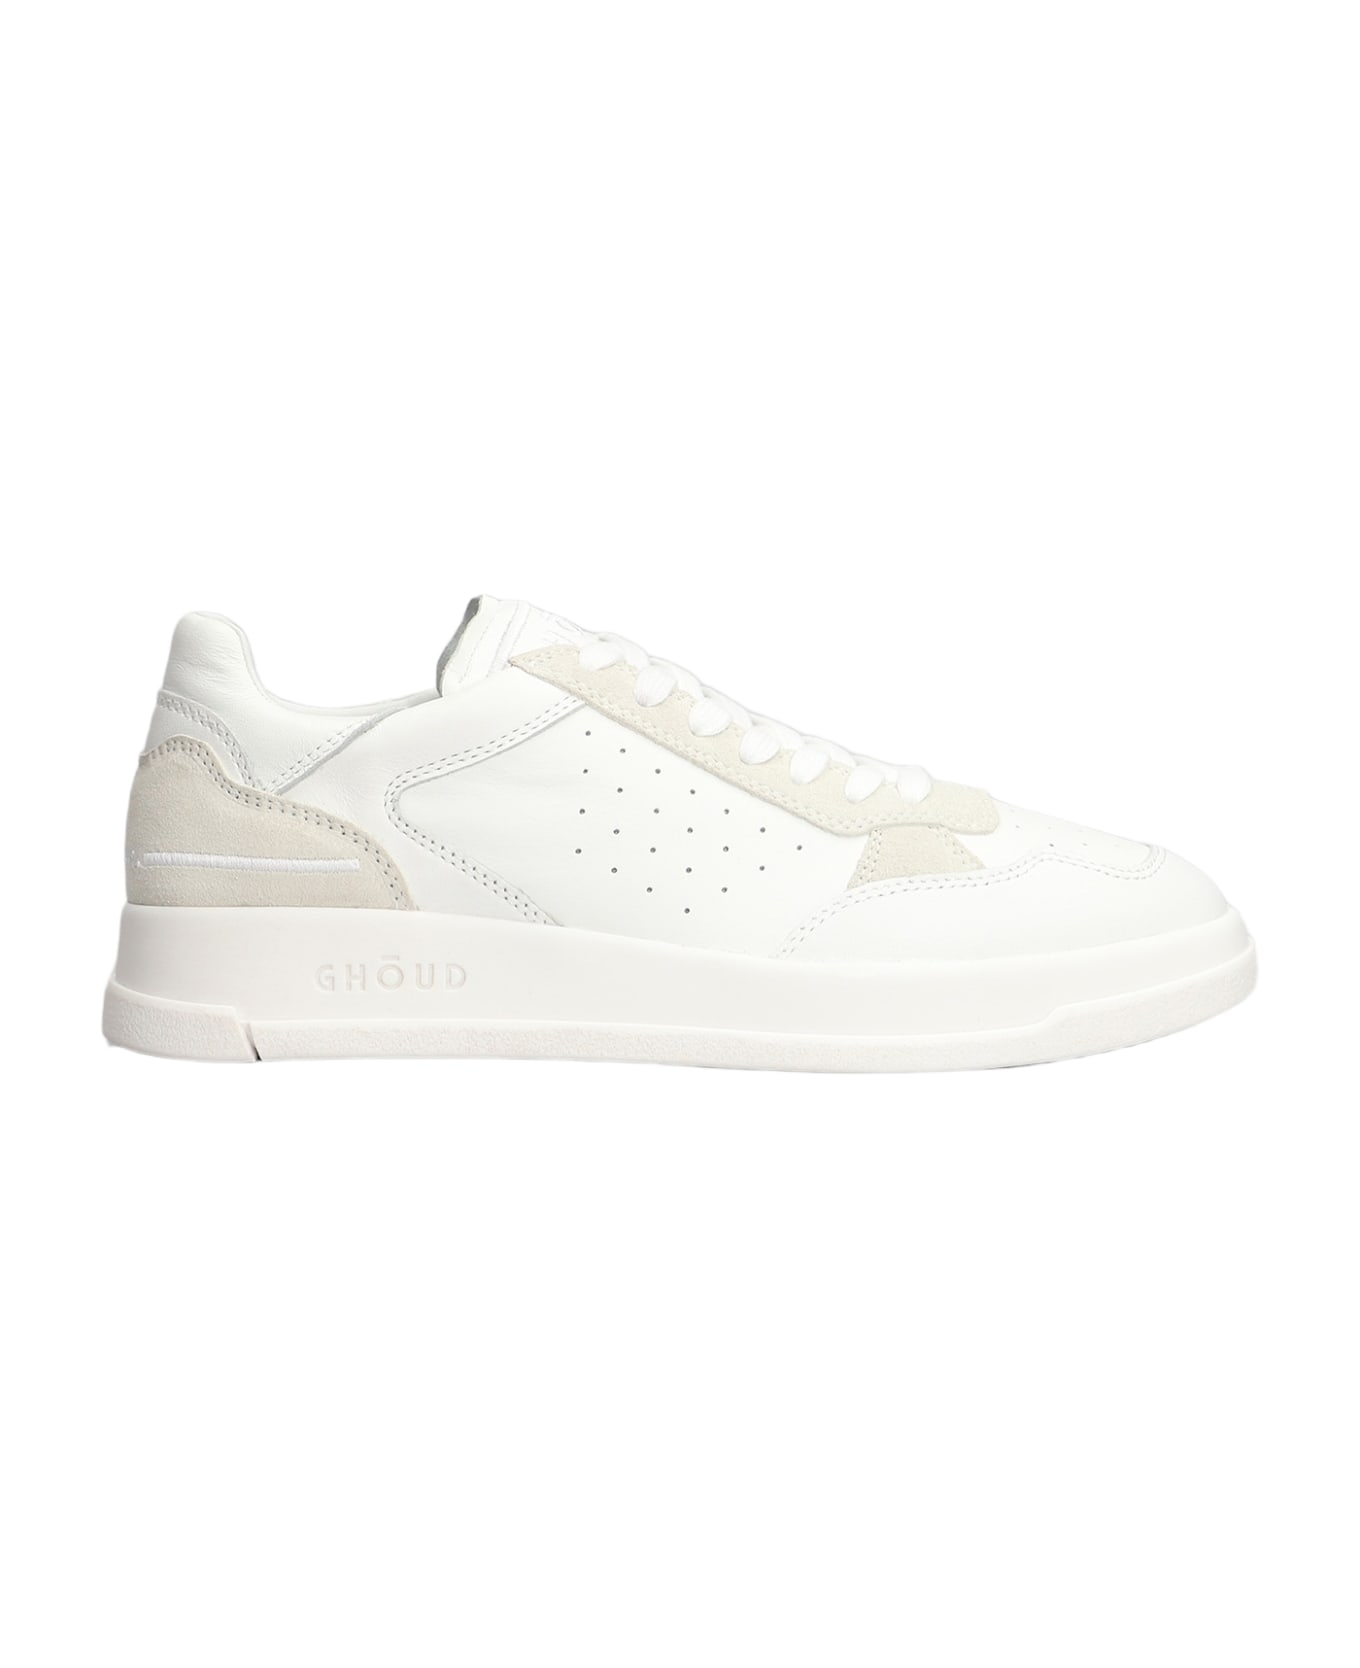 GHOUD Tweener Low Sneakers In White Suede And Leather - white スニーカー